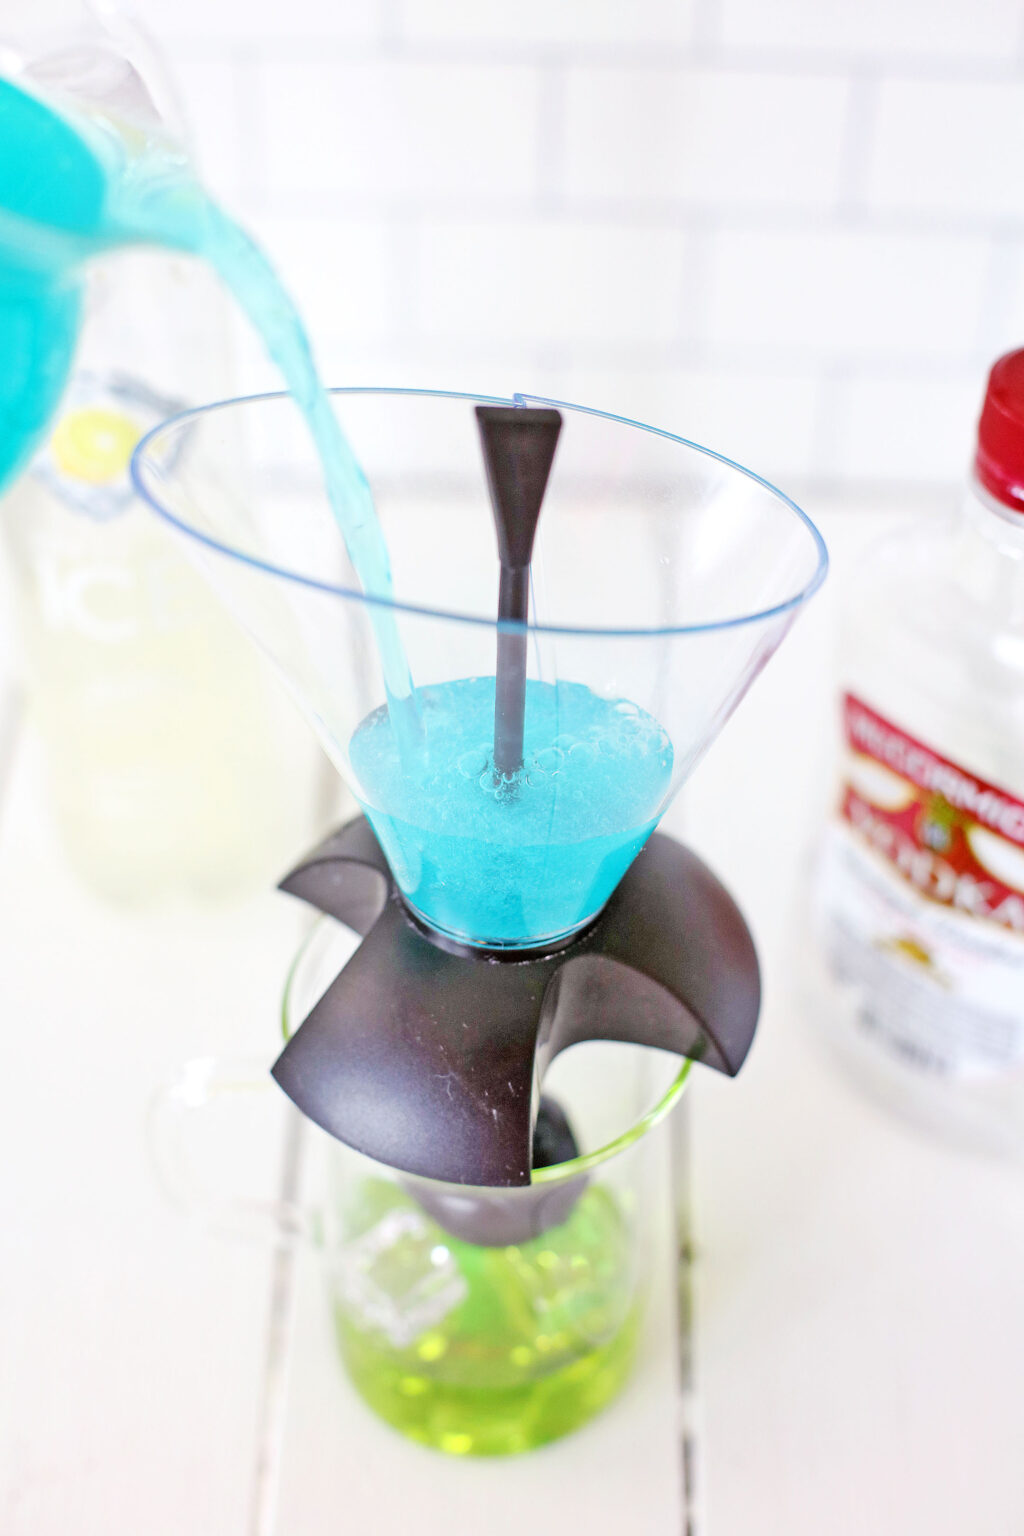 layering colorful drinks using a drink layering tool